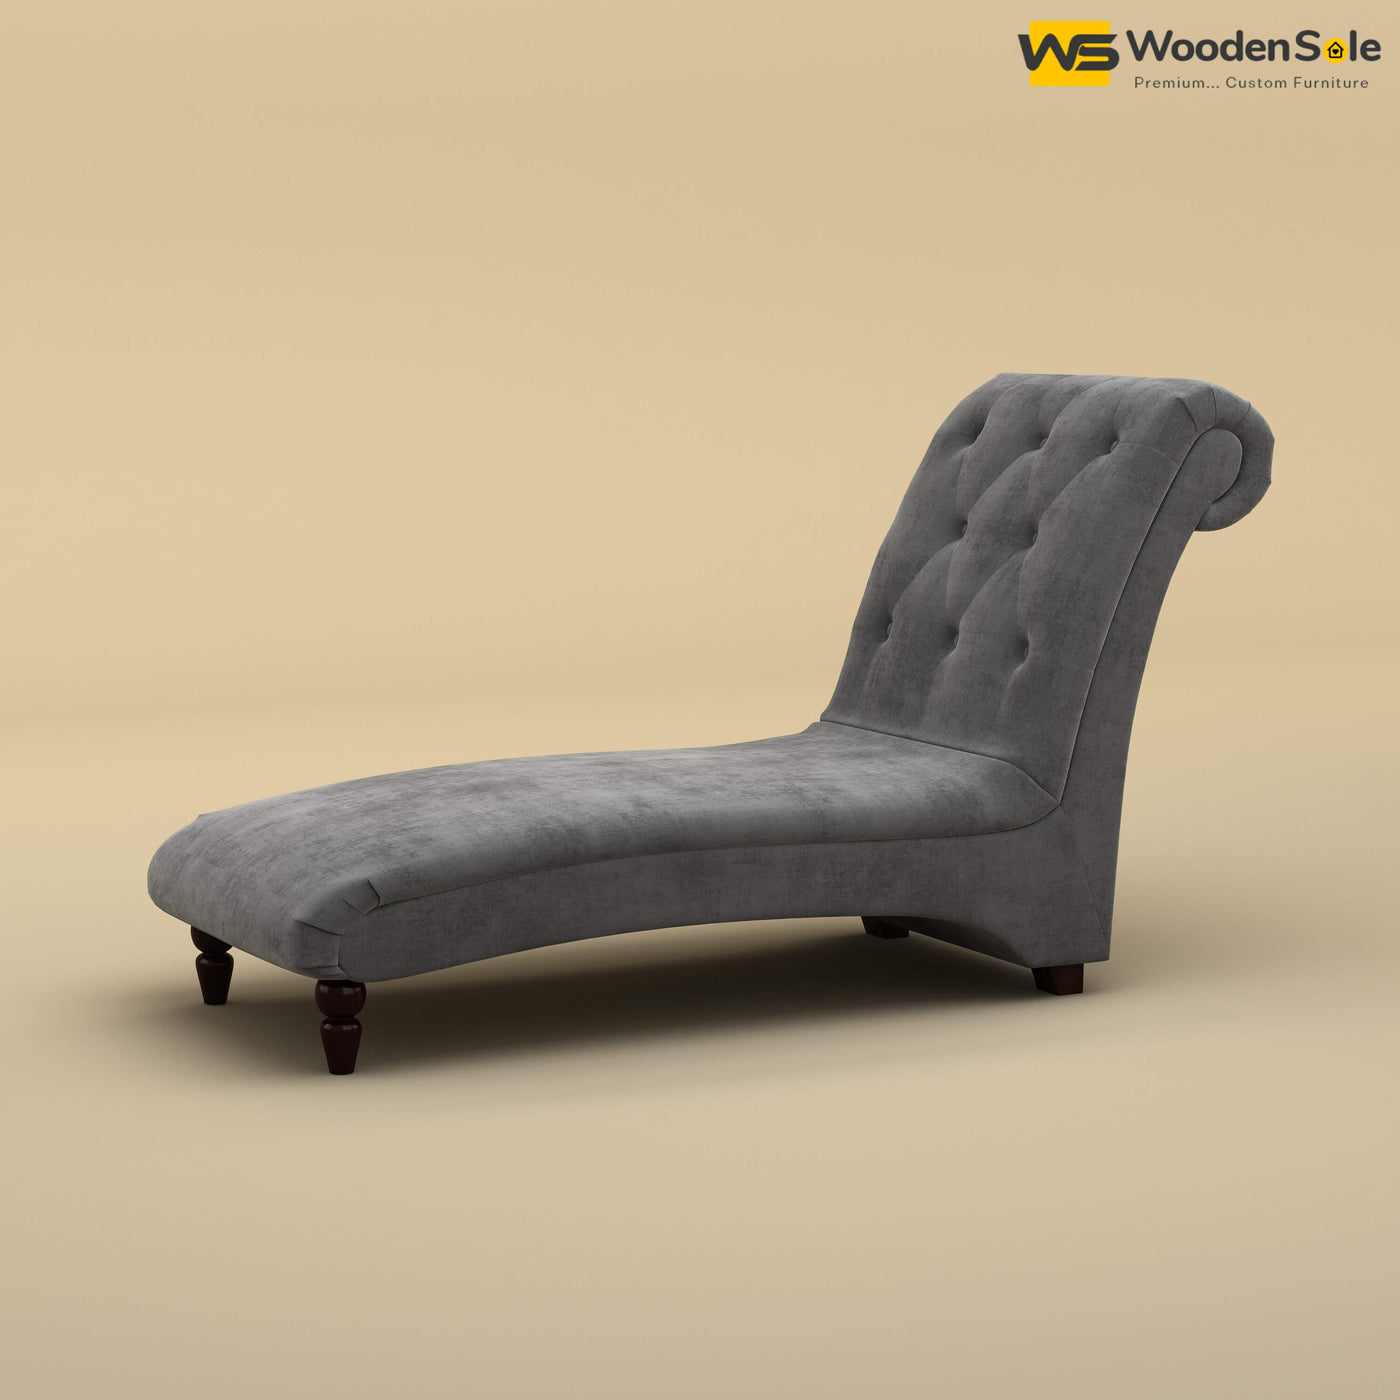 Turkish Chaise Lounge (Velvet, Charcoal Gray)